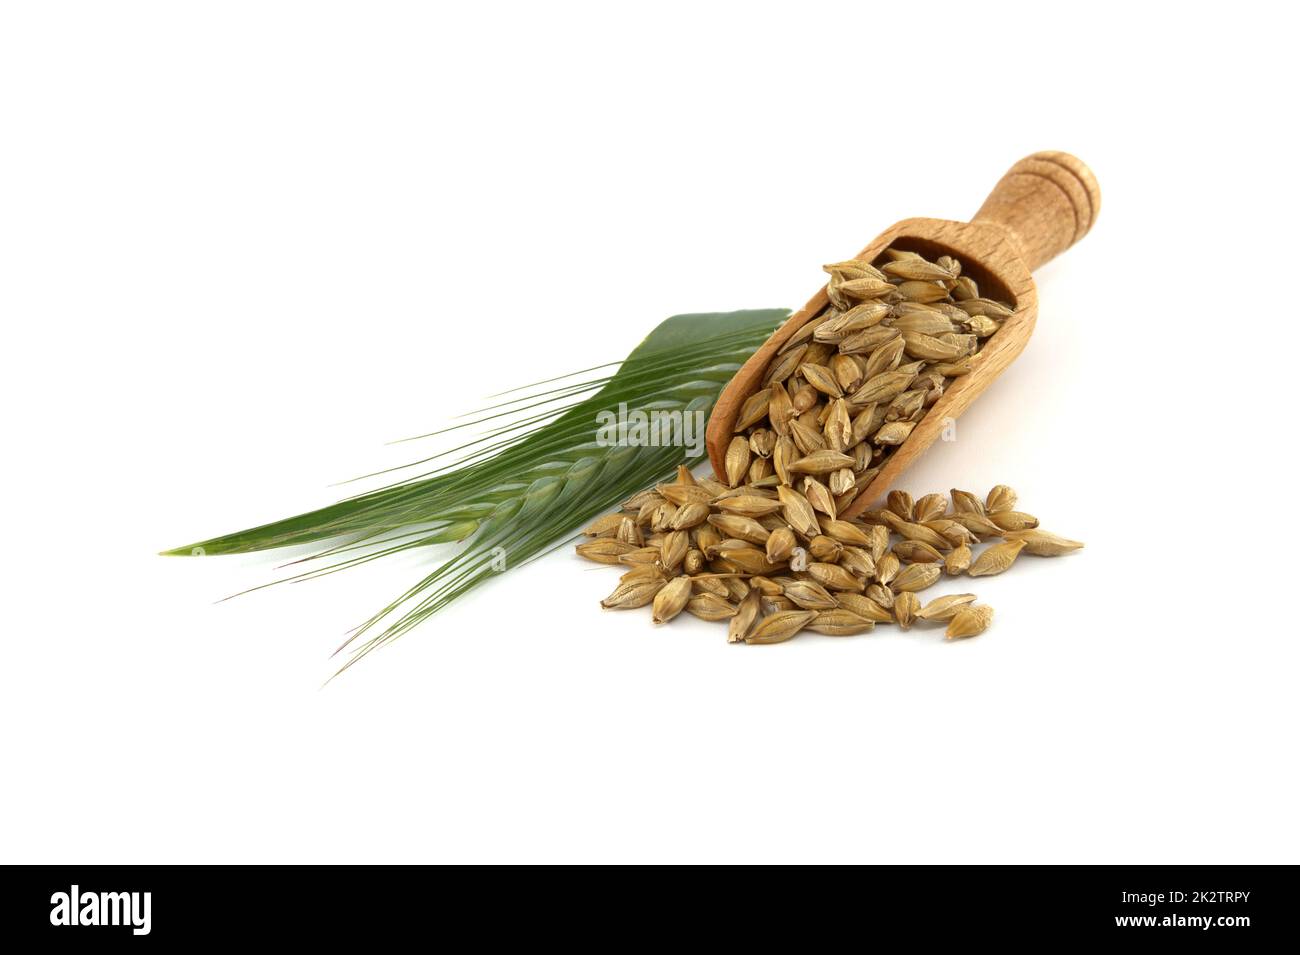 Barley grain spilling from wooden scoop Stock Photo